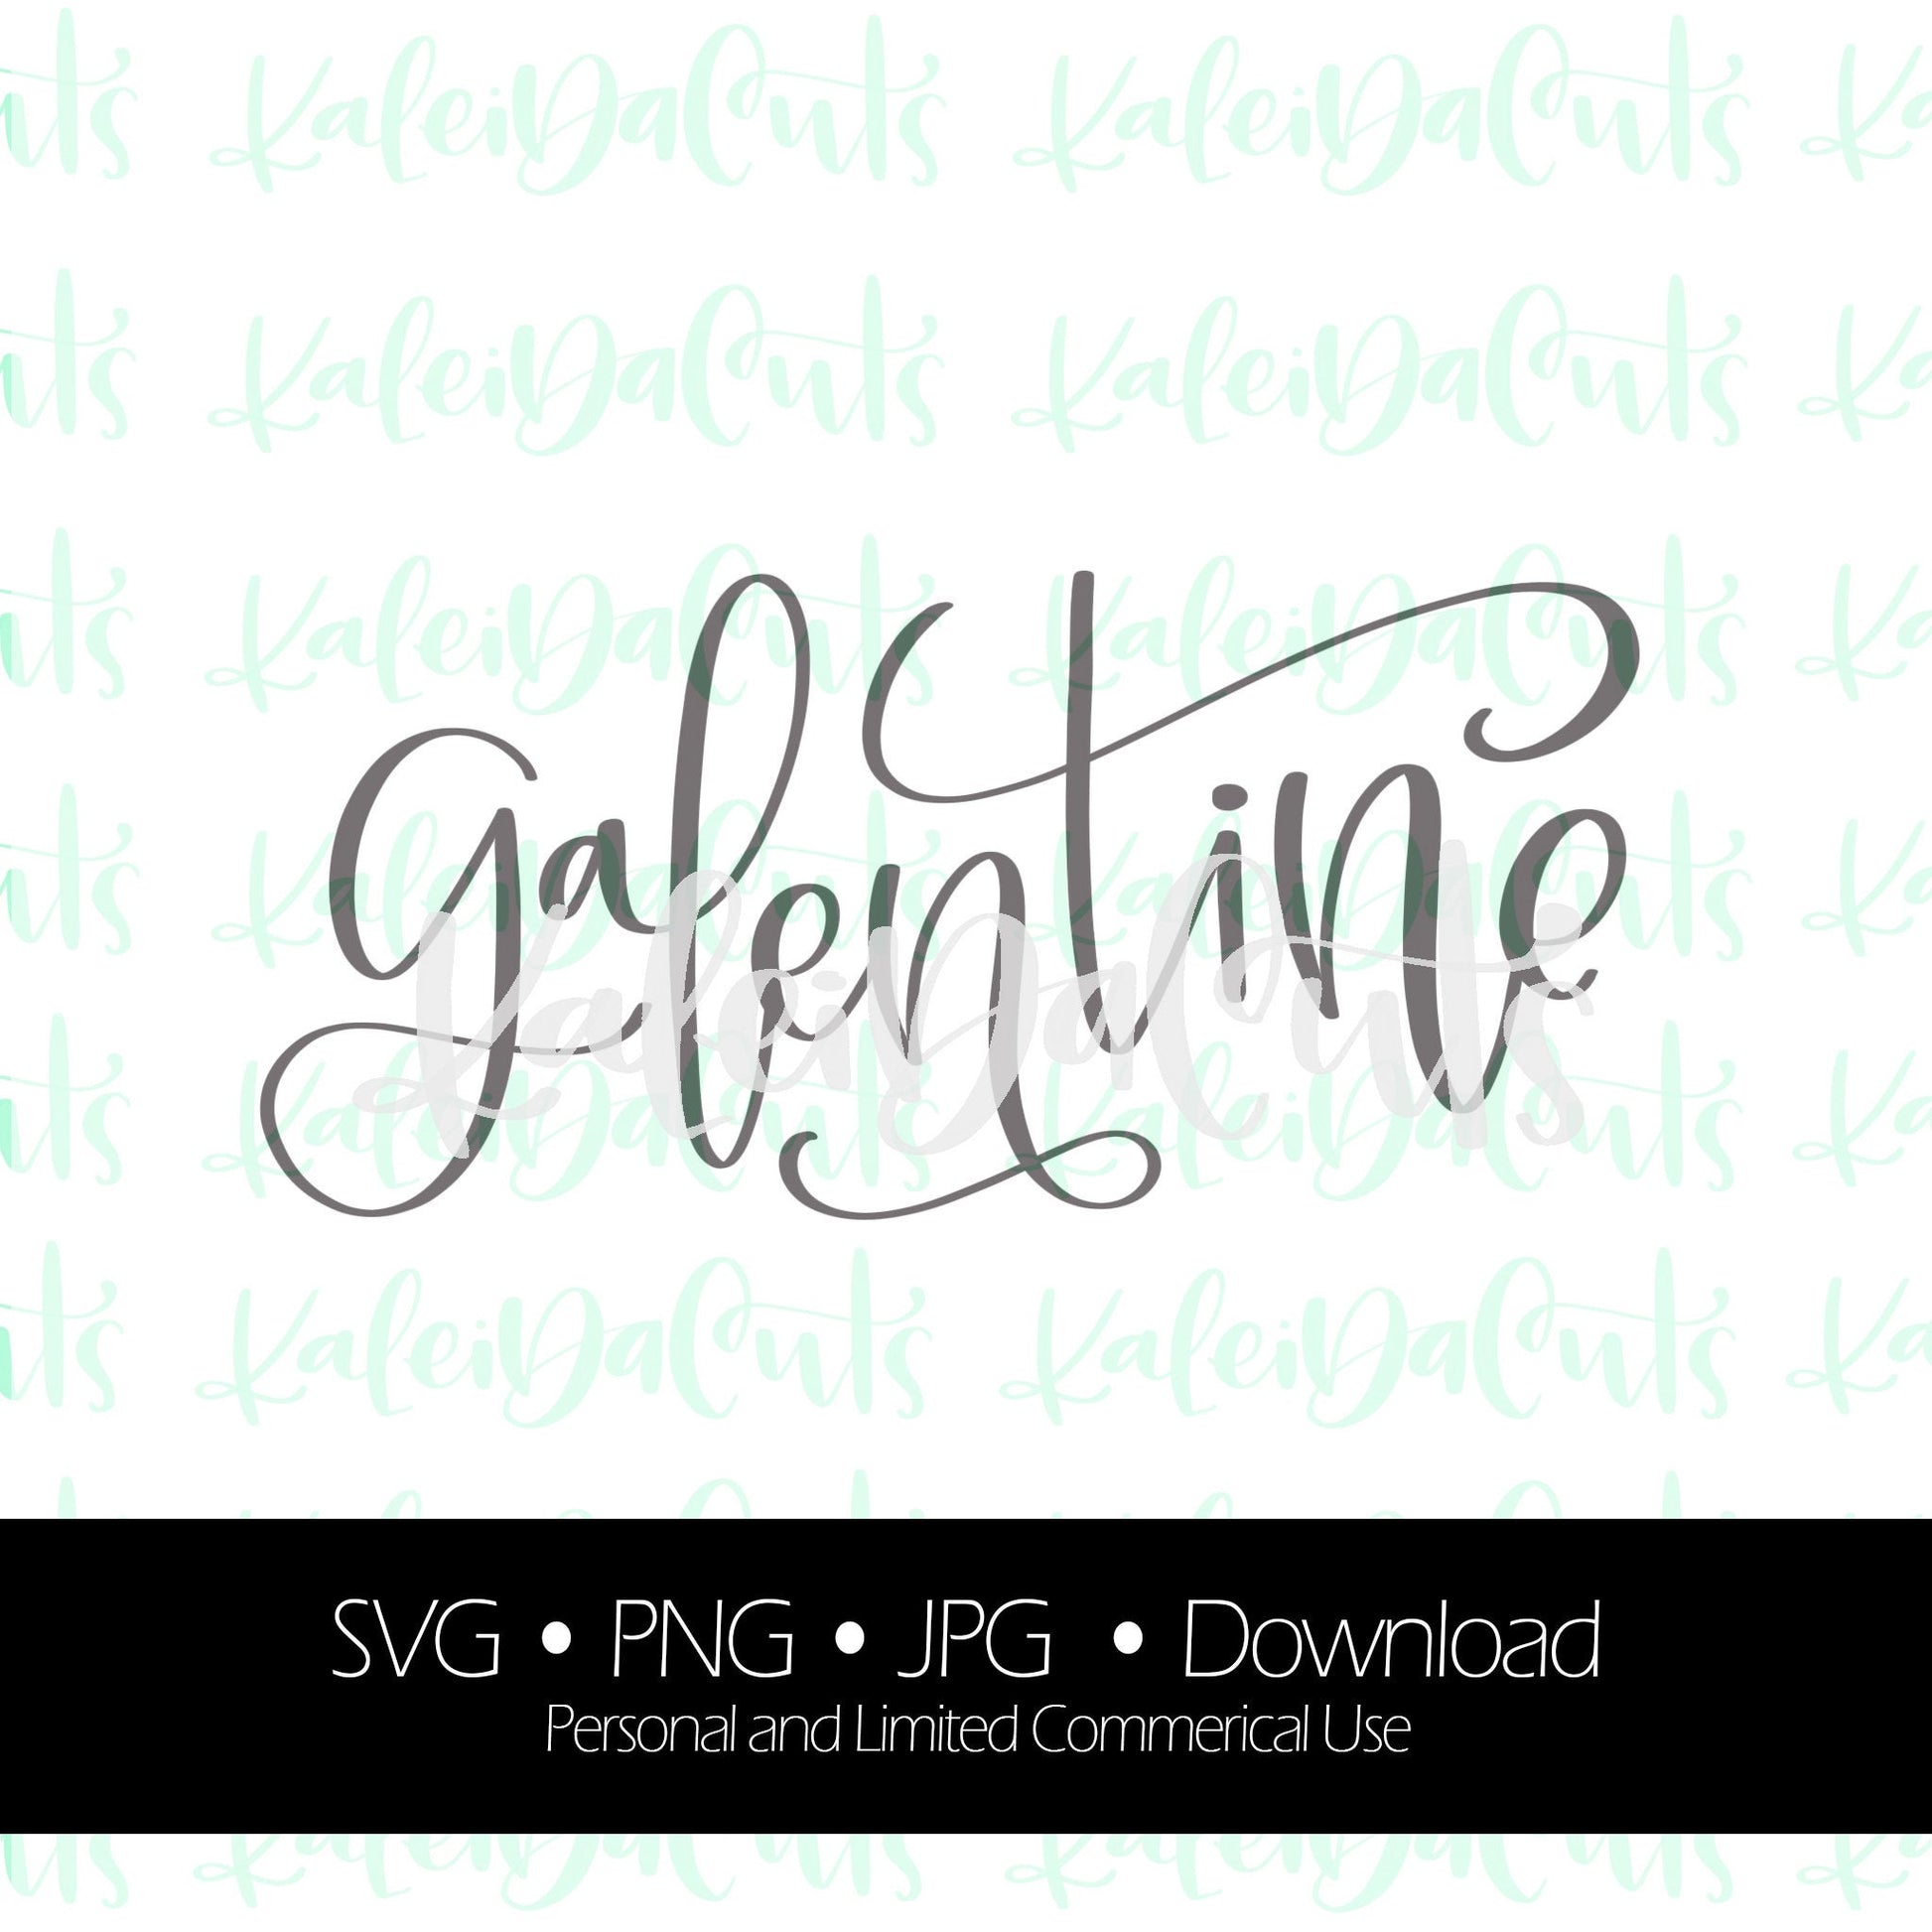 Galentine Lettering. SVG. Personal and Limited Commercial Use. KaleidaCuts Handlettering.